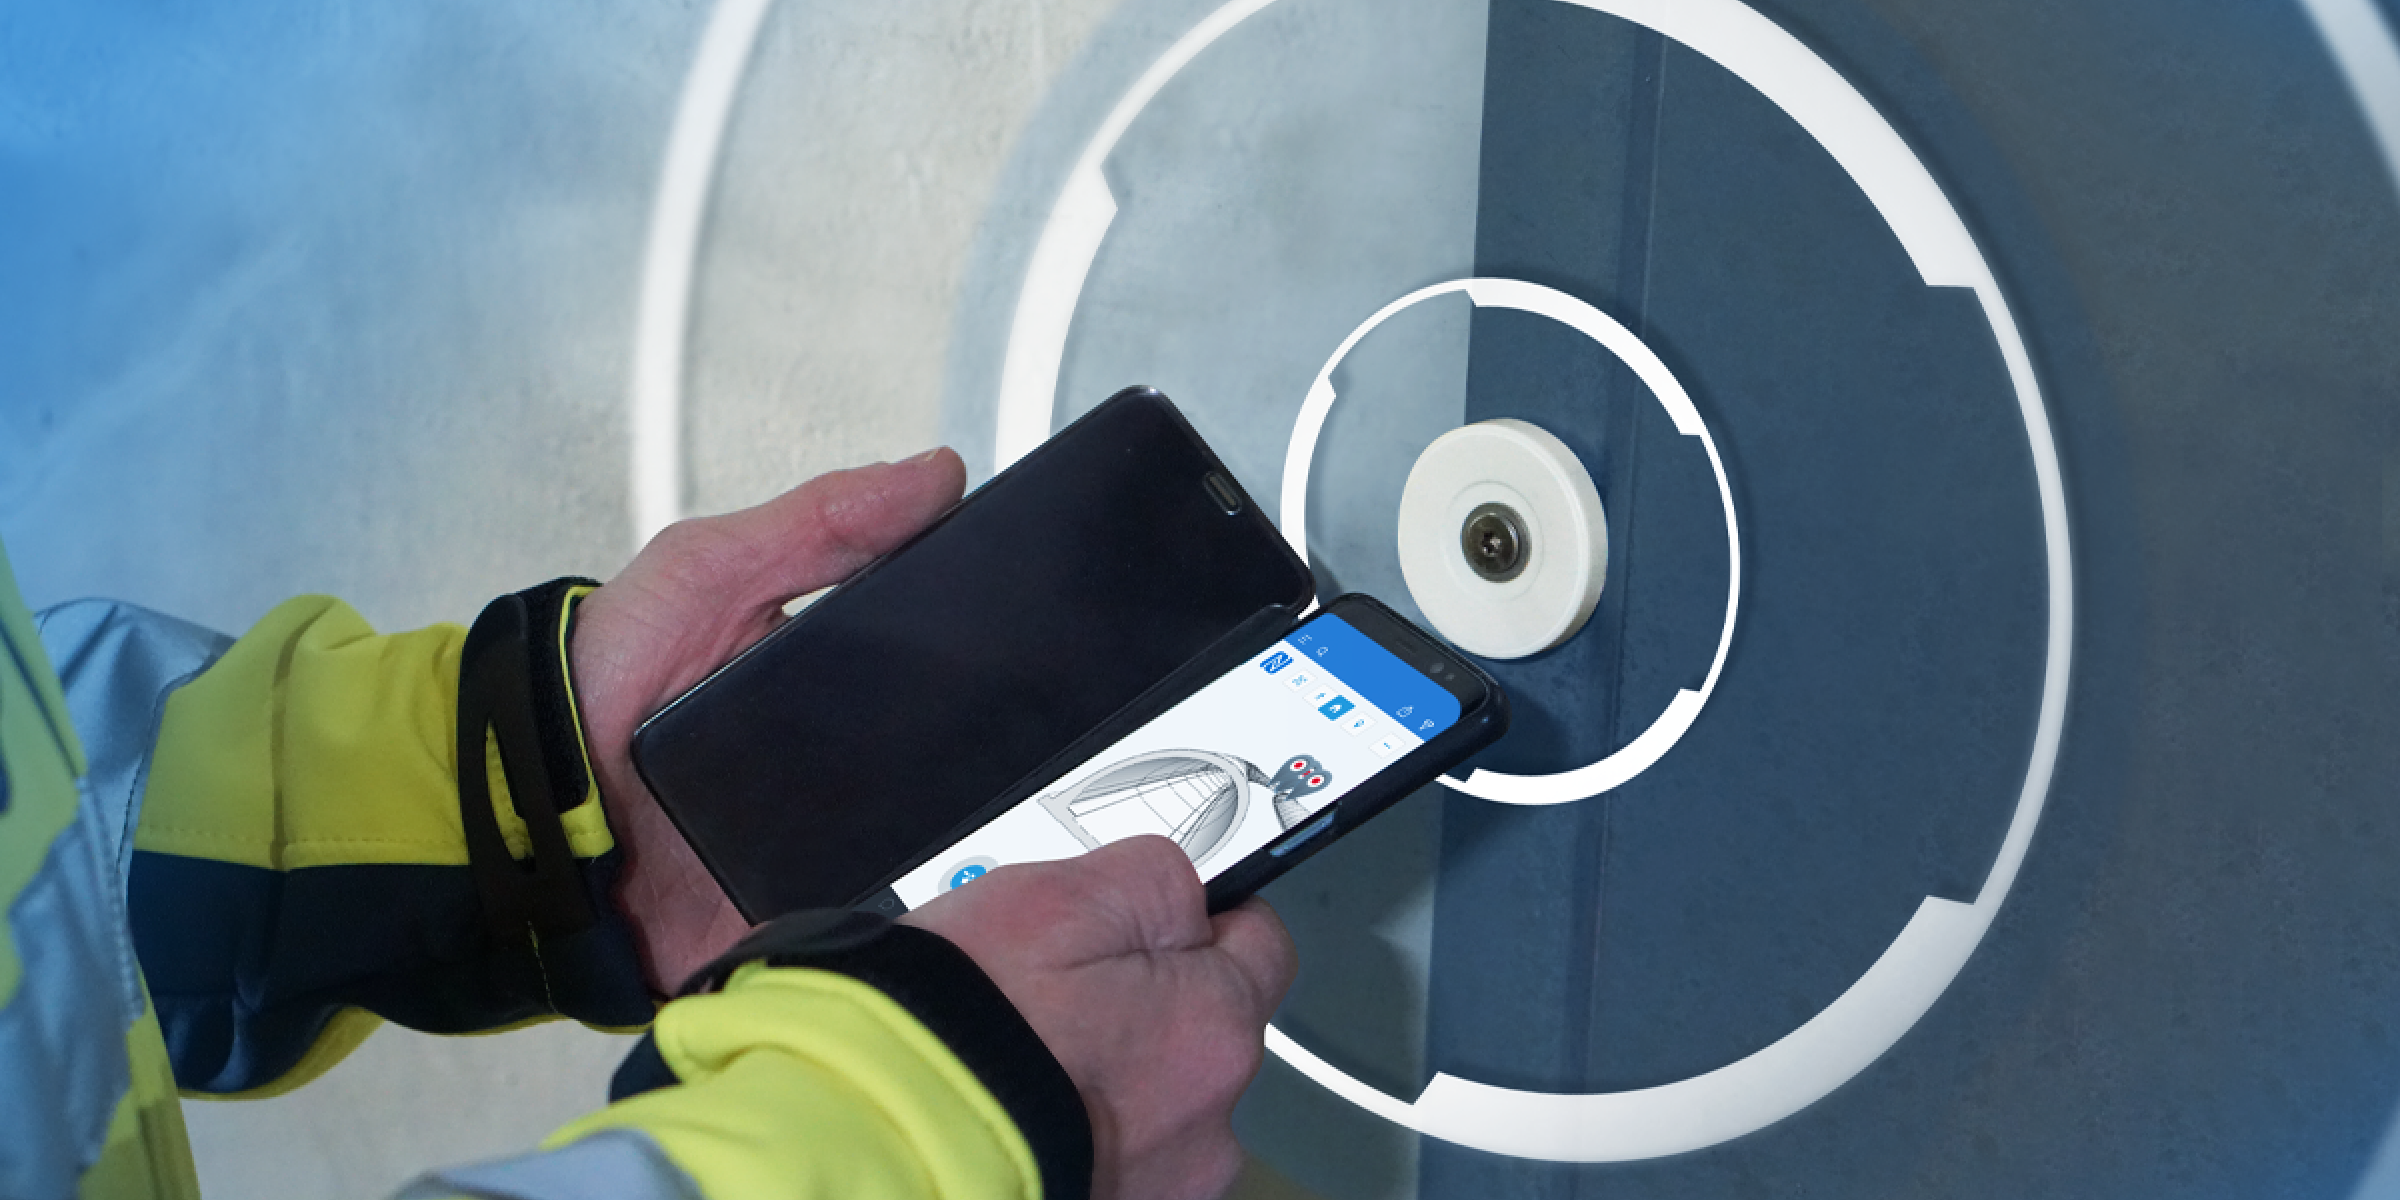 NFC tags vs QR codes: which is better for construction?